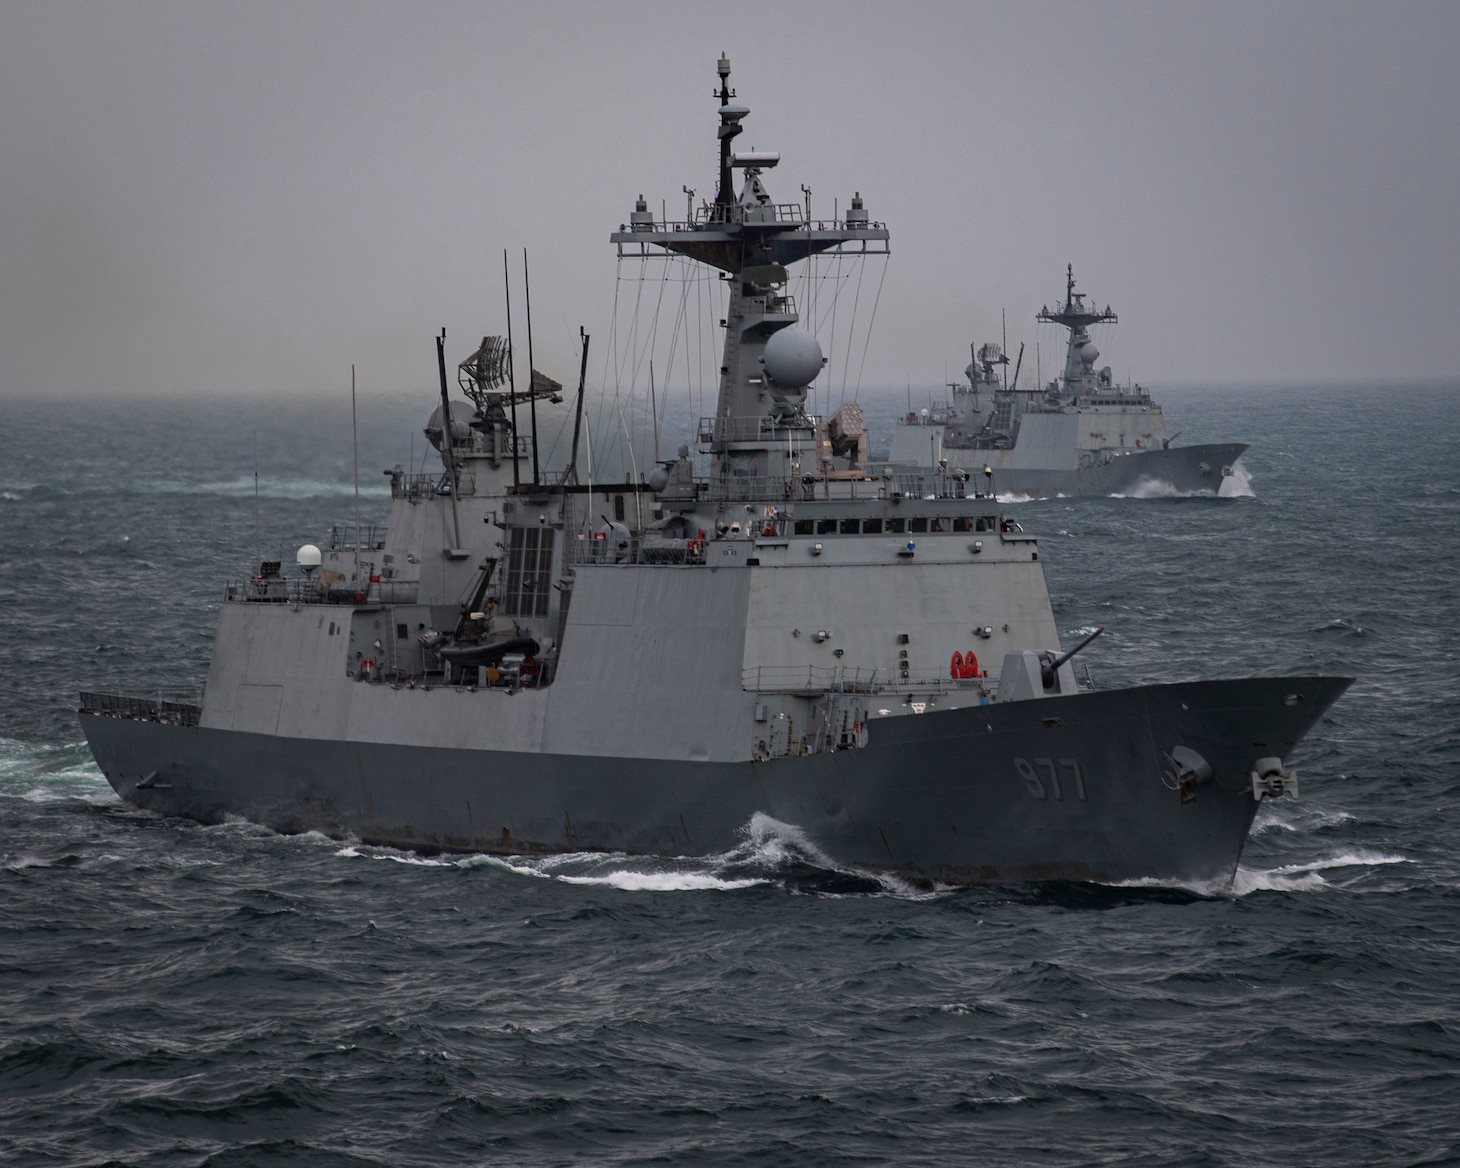 230404-N-MH015-1116 EAST CHINA SEA (April 4, 2023) The Republic of Korea (ROK) Chungmugong Yi Sun-Shin-class destroyers ROKS Dae Jo young (DDH 977) and ROKS Choi Young (DDH 981) steam in formation with the aircraft carrier USS Nimitz (CVN 68). The Nimitz Carrier Strike Group is conducting a trilateral maritime exercise with the ROK Navy and Japan Maritime Self-Defense Force in the U.S. 7th Fleet area of operations. 7th Fleet is the U.S. Navy's largest forward-deployed numbered fleet, and routinely interacts and operates with allies and partners in preserving a free and open Indo-Pacific region. (U.S. Navy photo by Mass Communication Specialist 2nd Class Joseph Calabrese)